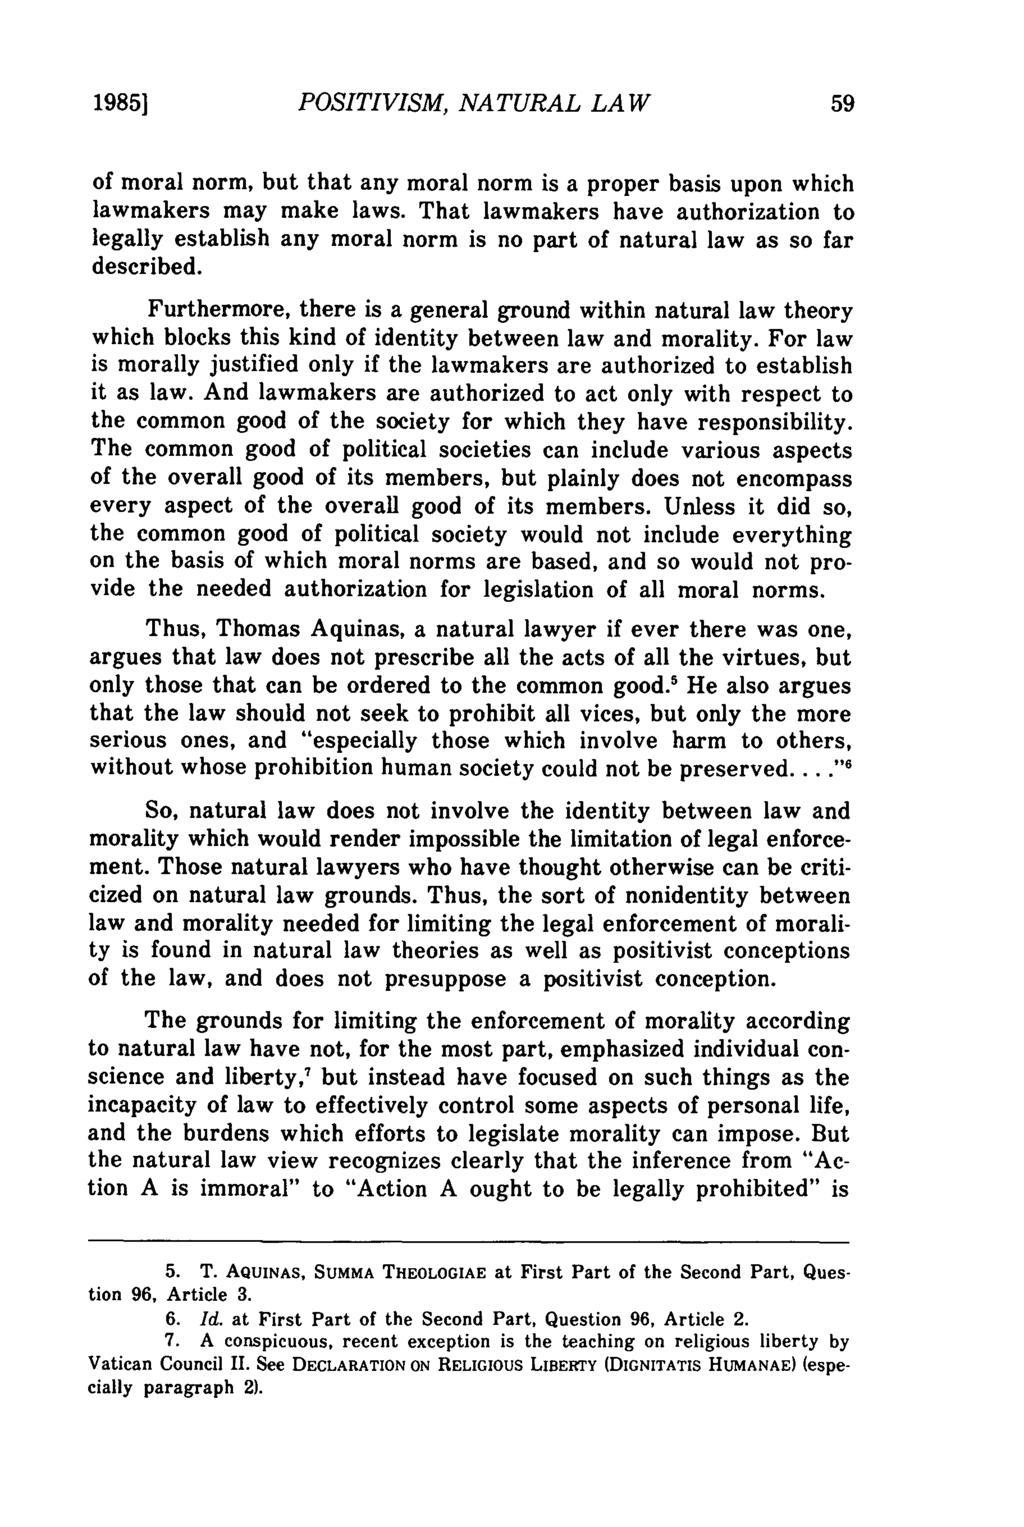 19851 Boyle: Positivism, Natural Law, and Disestablishment: Some Questions Ra POSITIVISM, NATURAL LAW of moral norm, but that any moral norm is a proper basis upon which lawmakers may make laws.